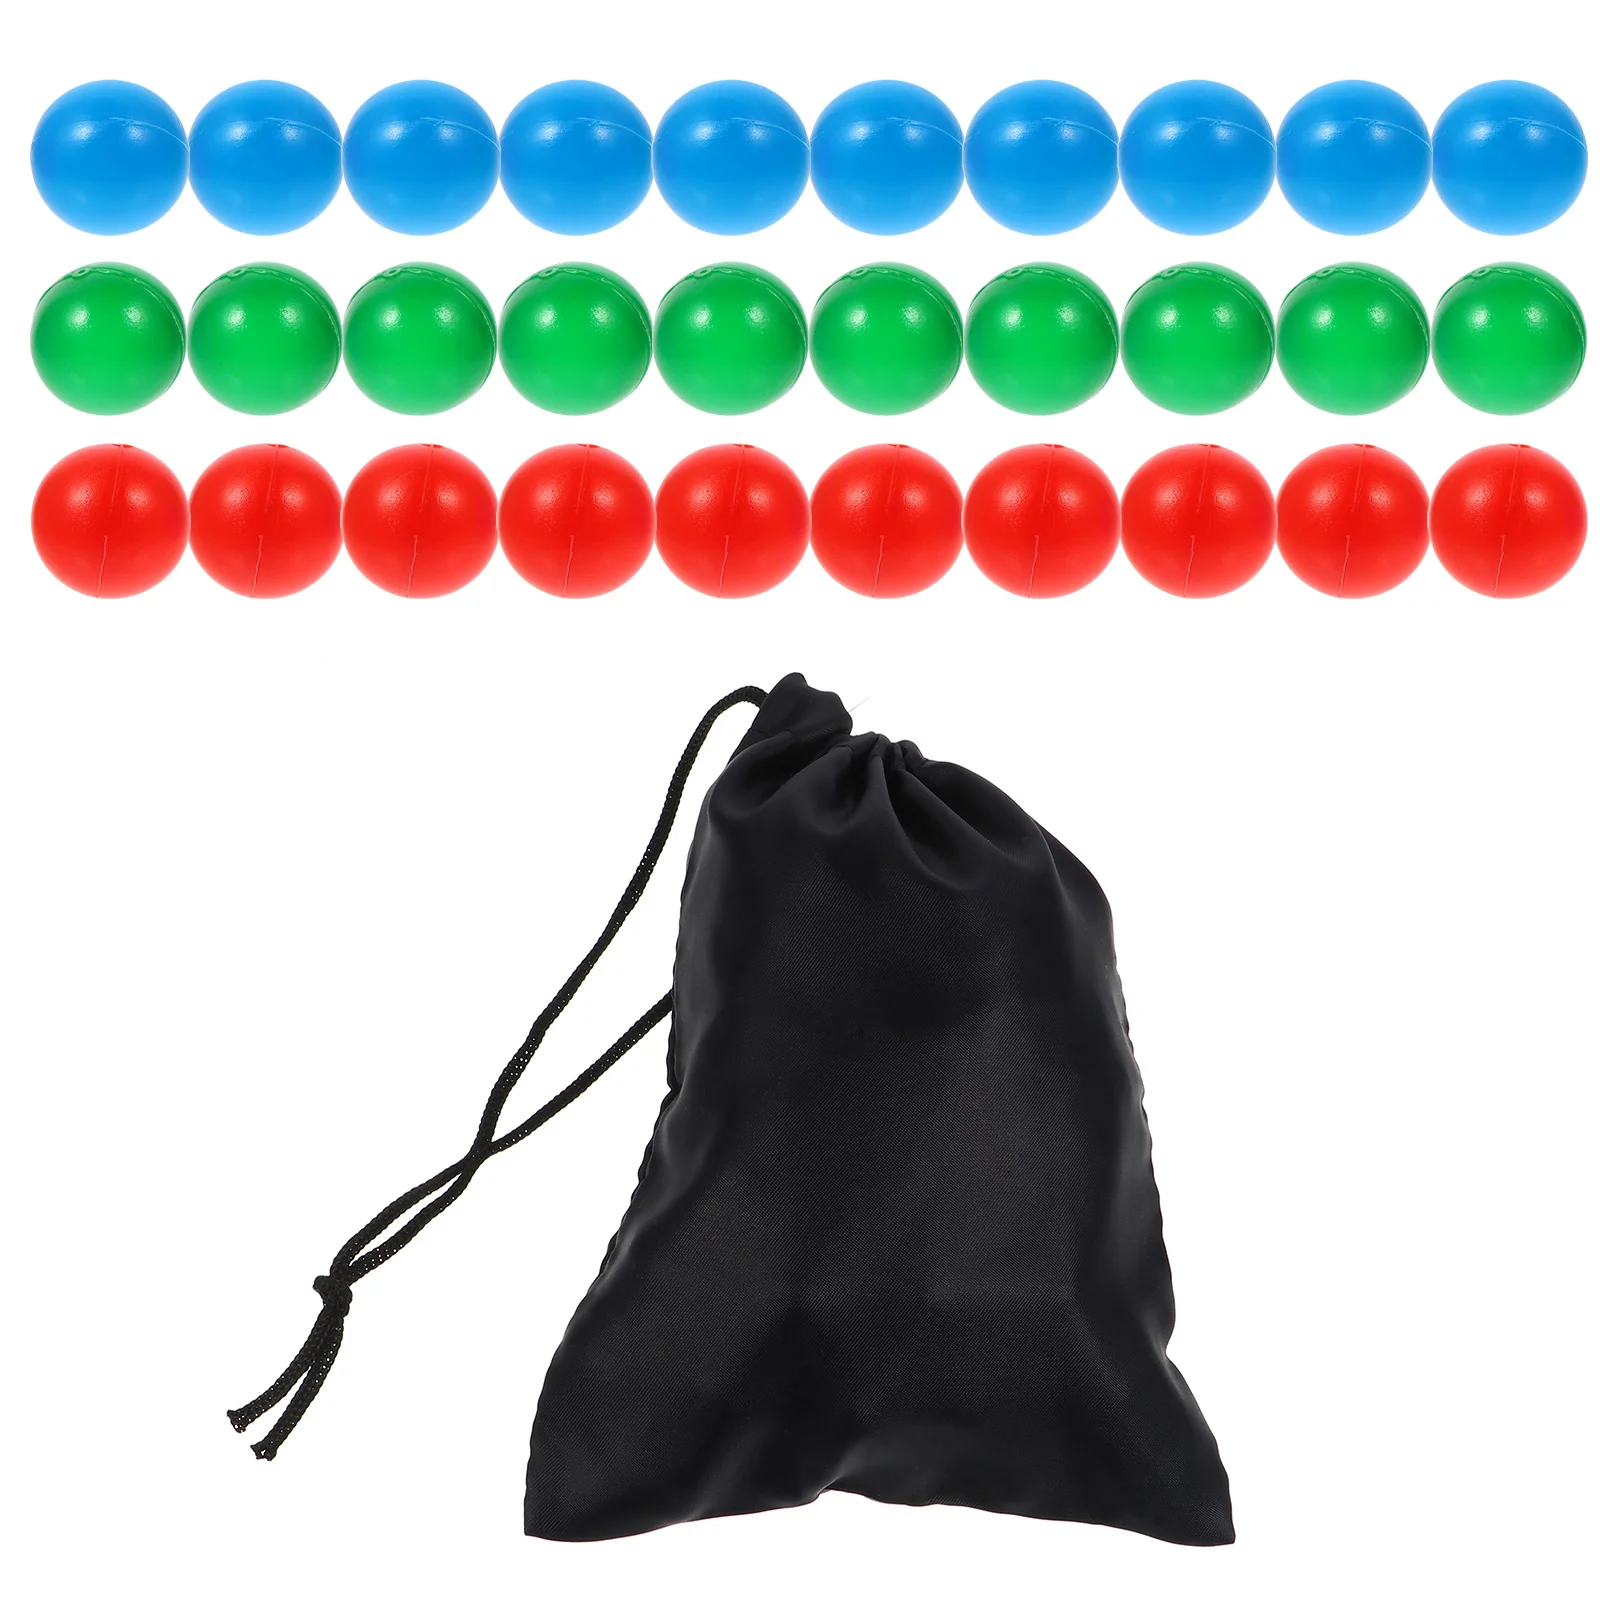 

30pcs 15mm Counting Balls Colored Plastic Balls Probability Learning Ball Toy